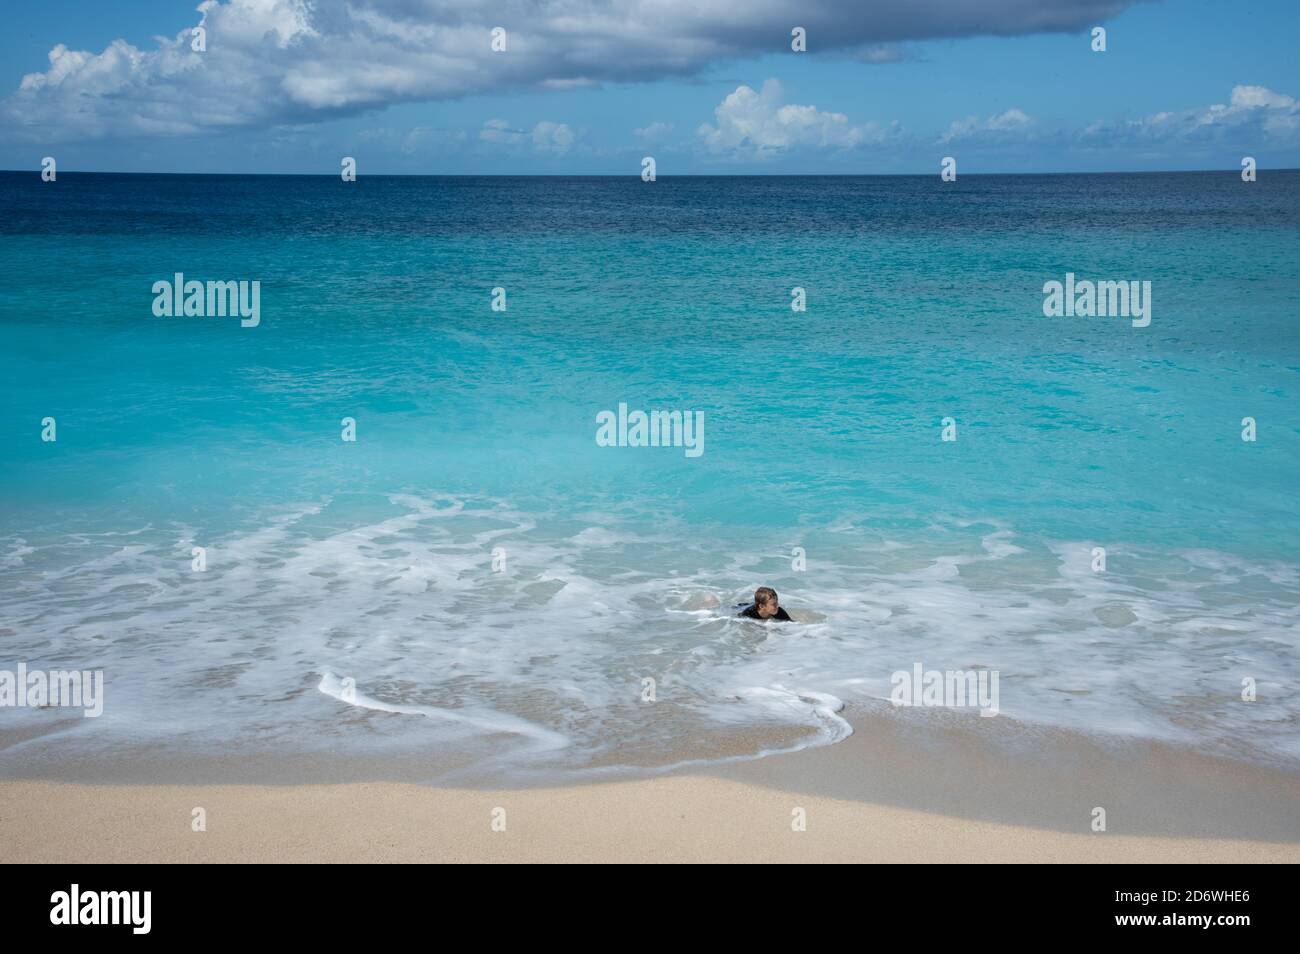 Frederiksted, St. Croix, US Virgin Islands-December 22,2019: Tourist bodysurfing at Sandy Point beach with pure blue Caribbean Sea waters on St. Croix Stock Photo